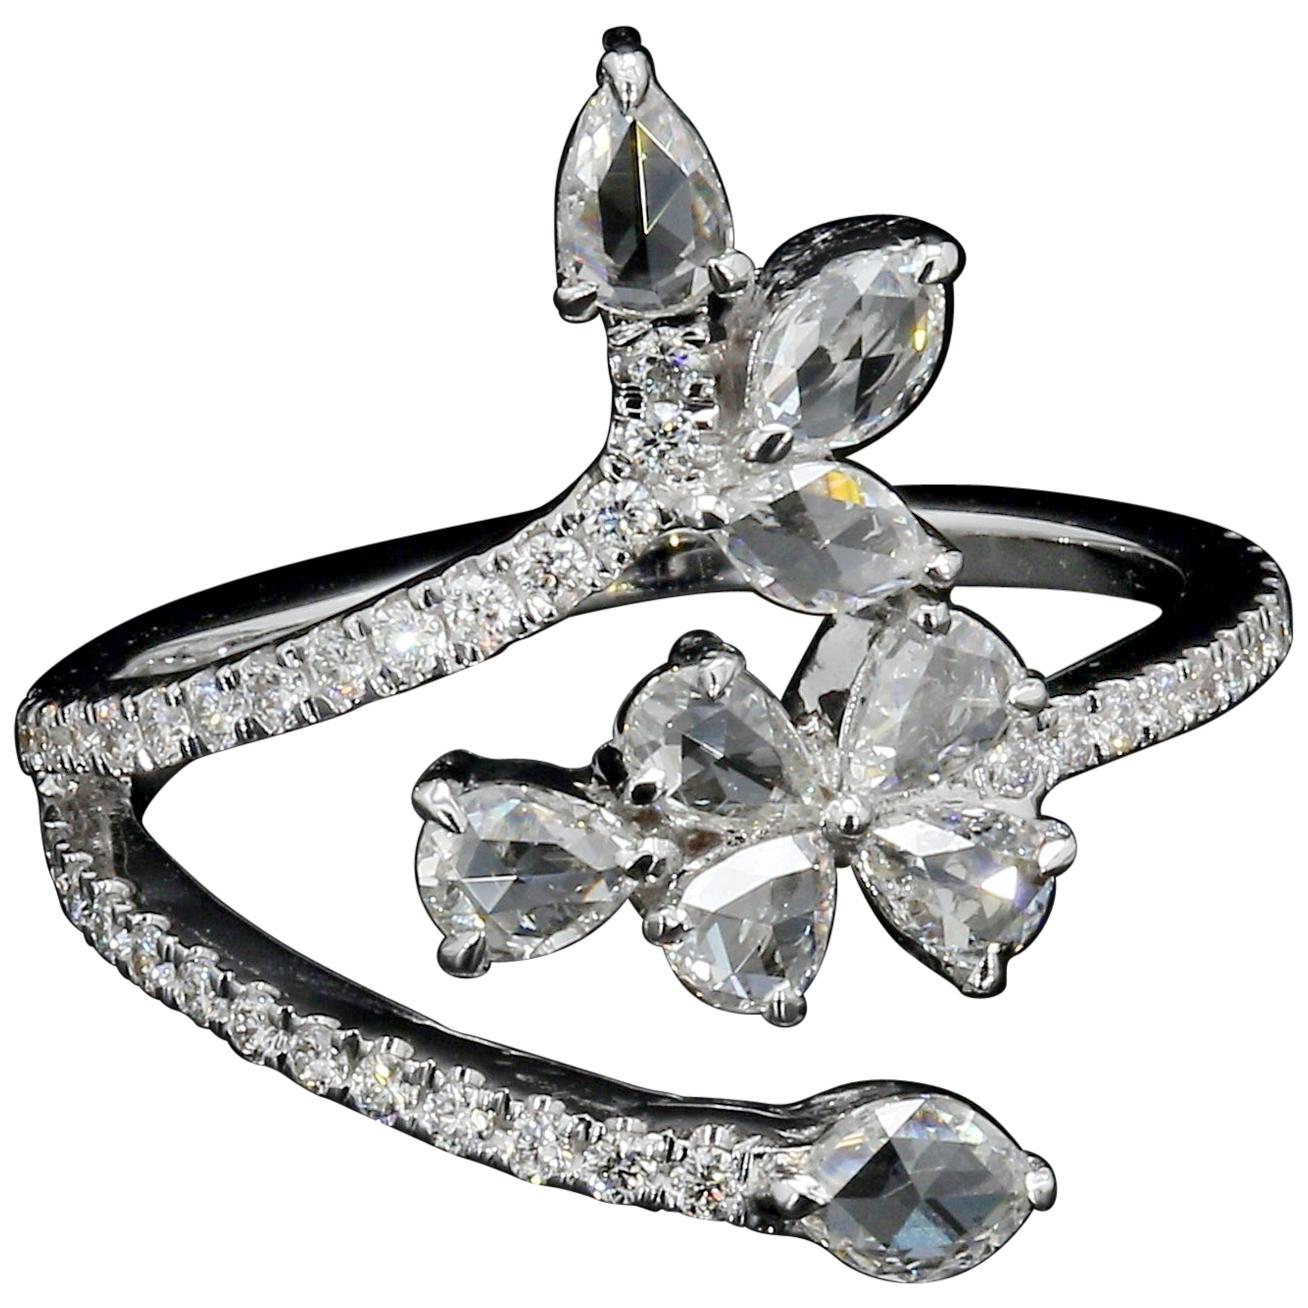 PANIM 0.91 Carat Ring with Diamond Rosecut in 18K White Gold

Set in 18K White Gold with top quality Rosecuts shapes in Pear.

Colour G+
Quality VVS/VS

Contact us on this platform to get more details